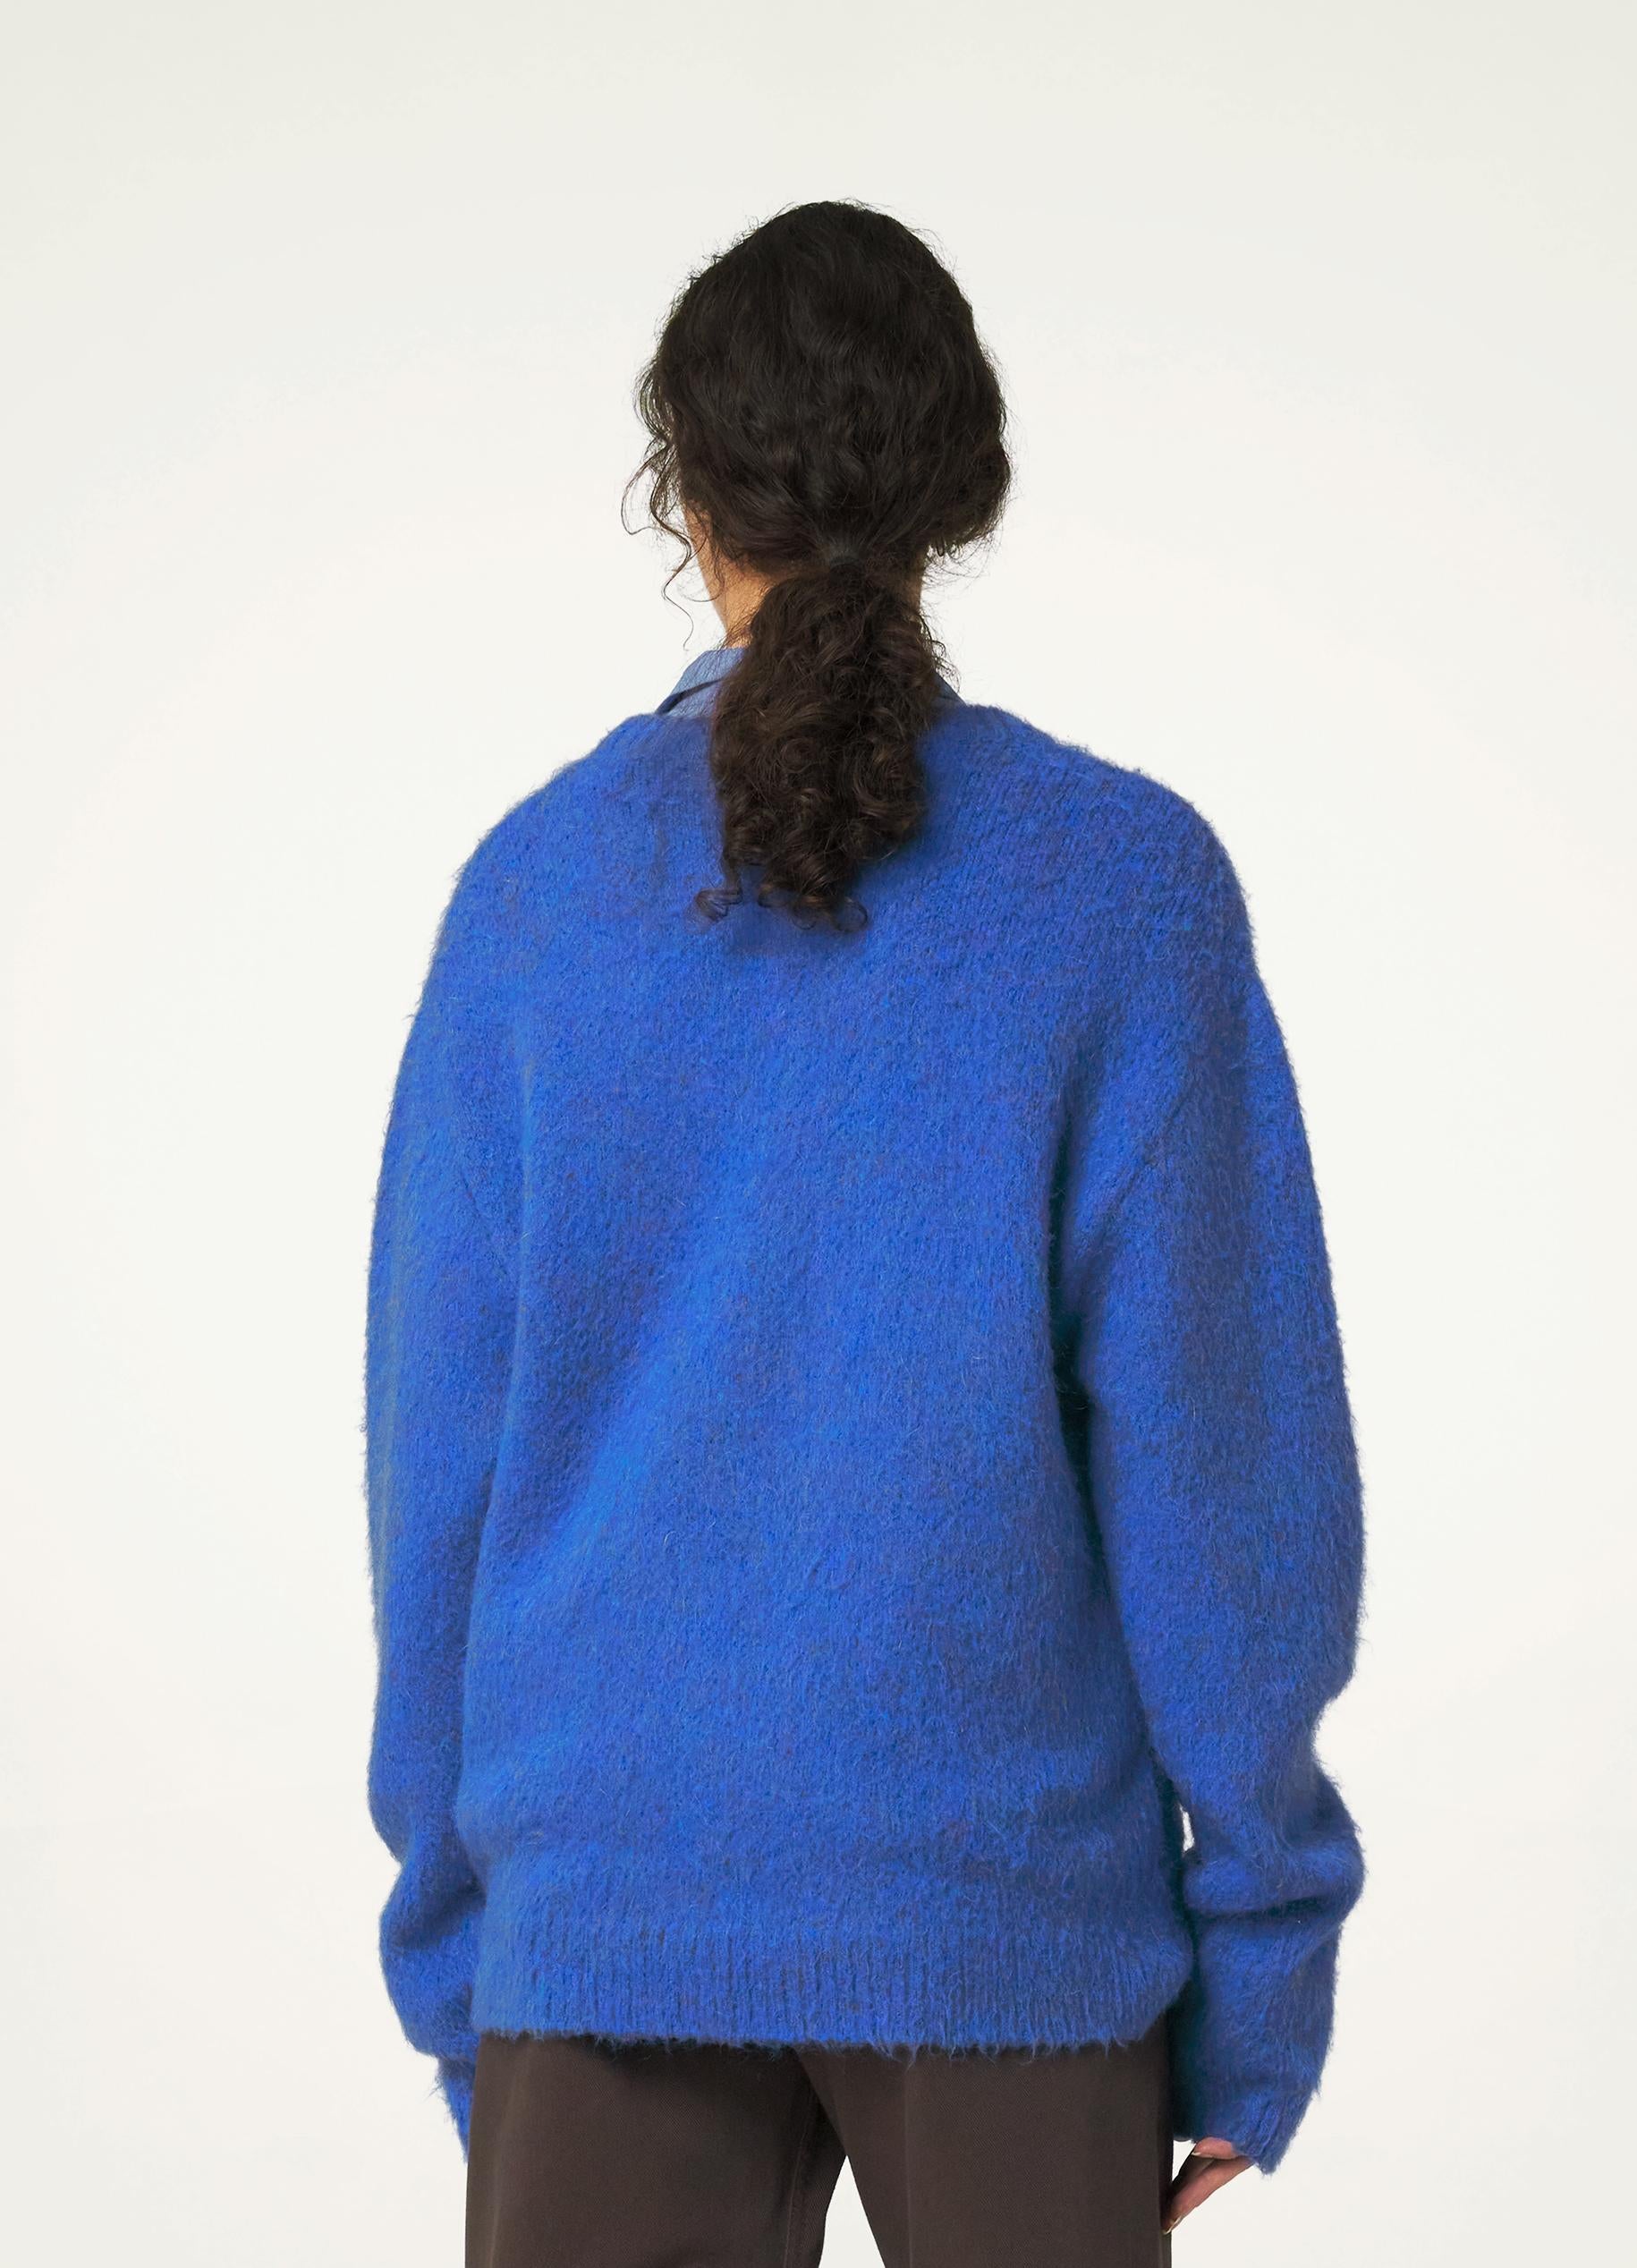 How To Wash Your Mohair Jumper by Georgie Lavin